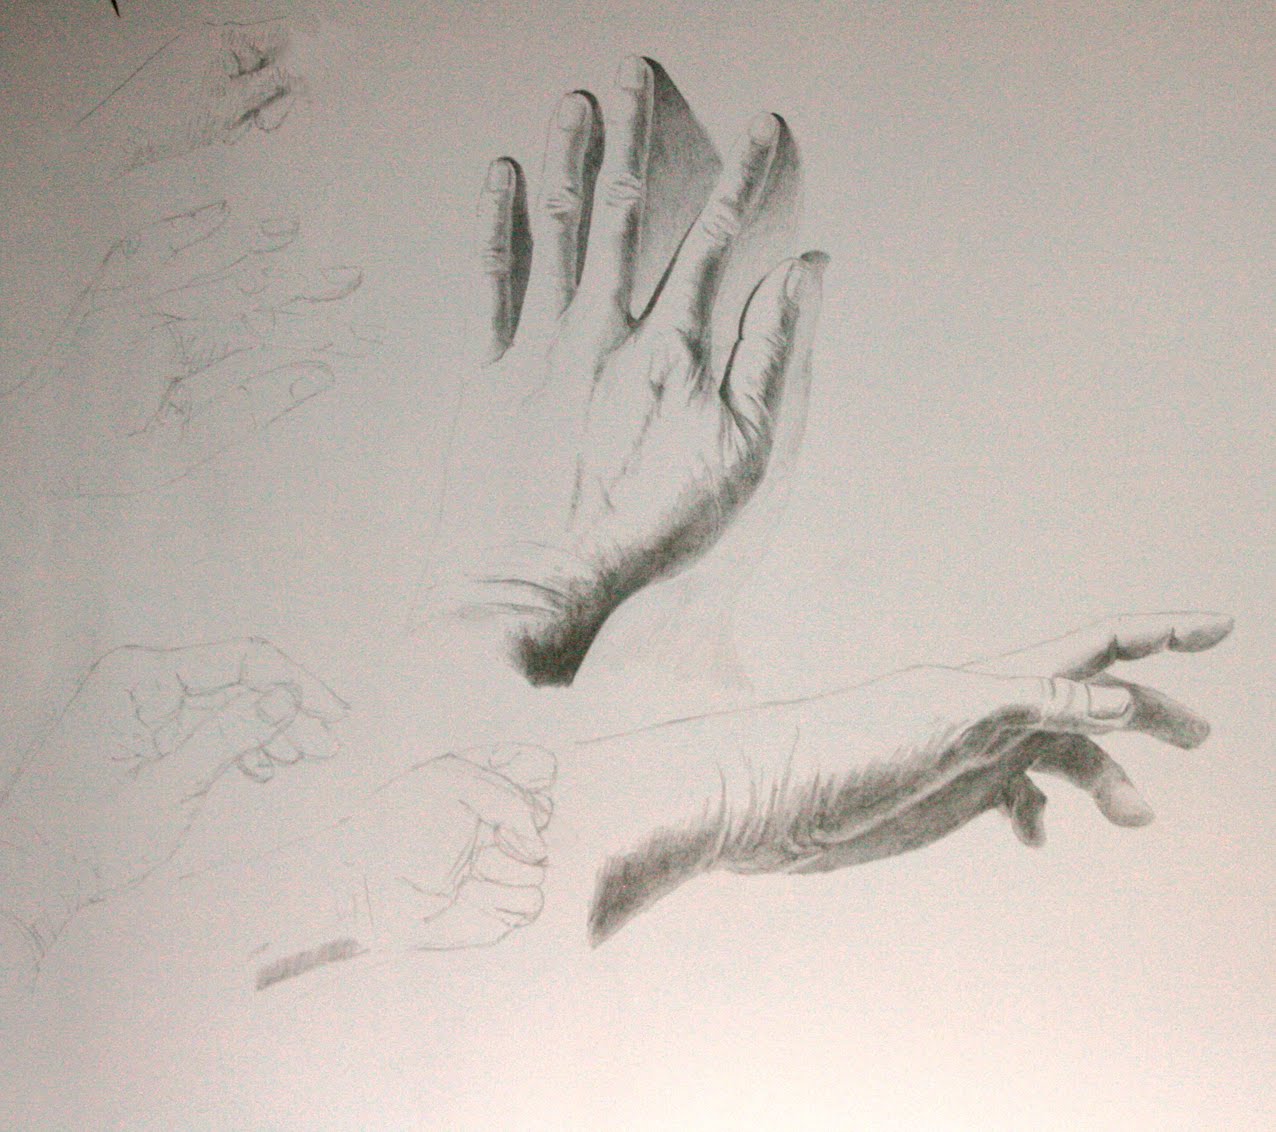 THE LAST VISIBLE DOG: Graphite tonal drawings of hands